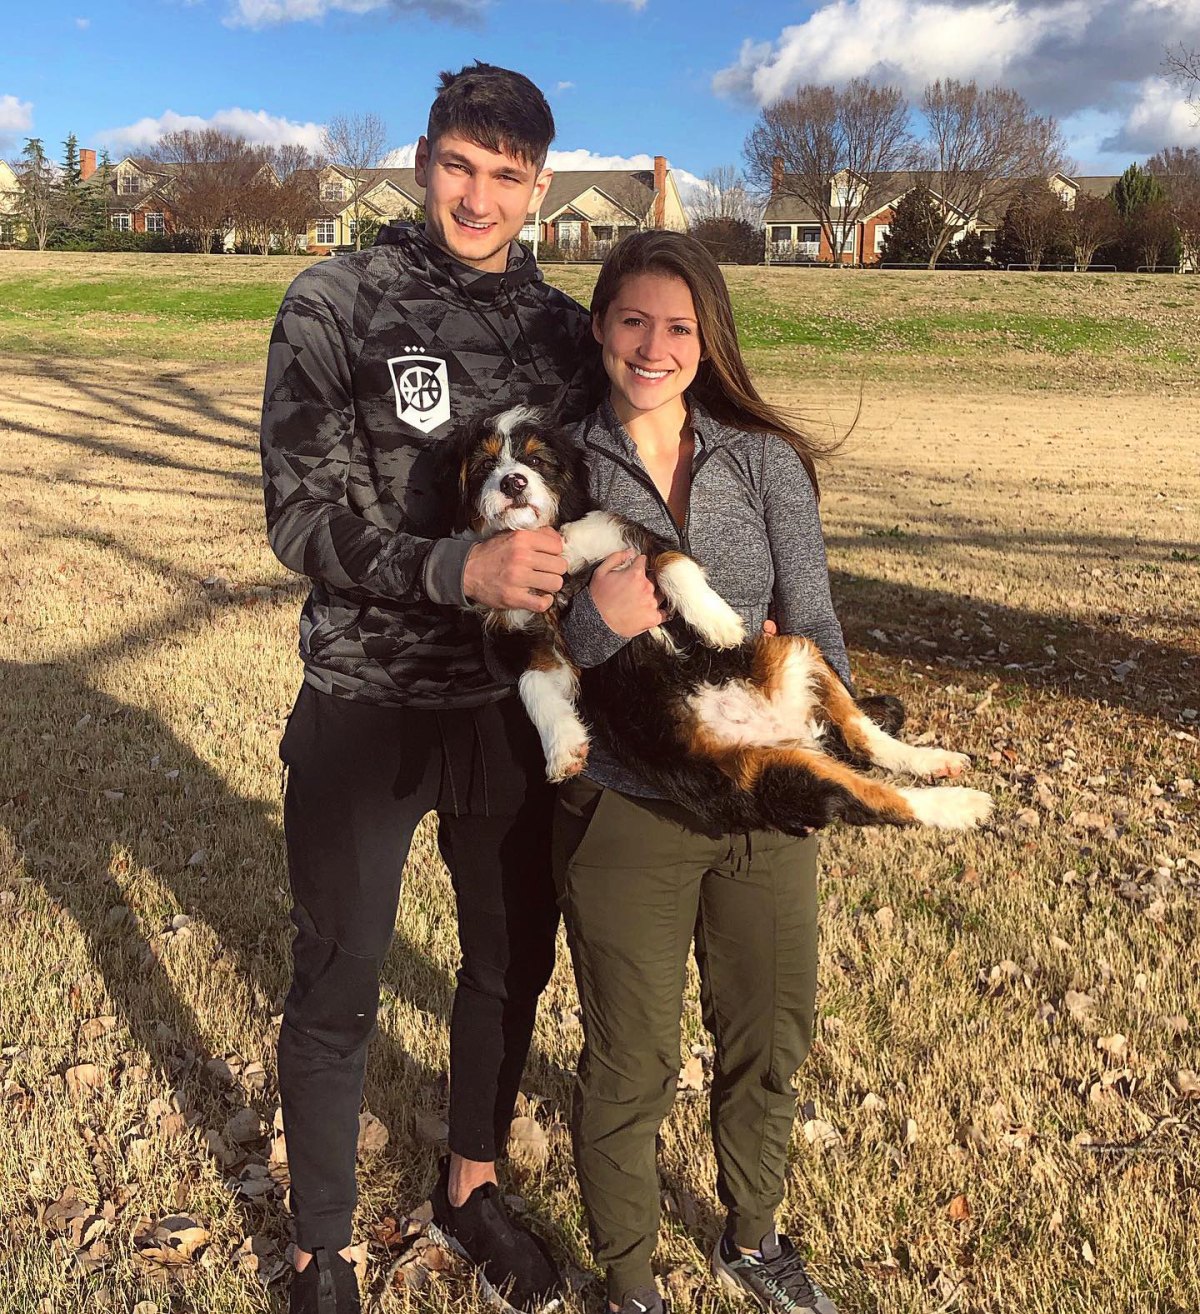 Photo: Grayson Allen's Girlfriend Is Excited For Duke-North Carolina - The  Spun: What's Trending In The Sports World Today